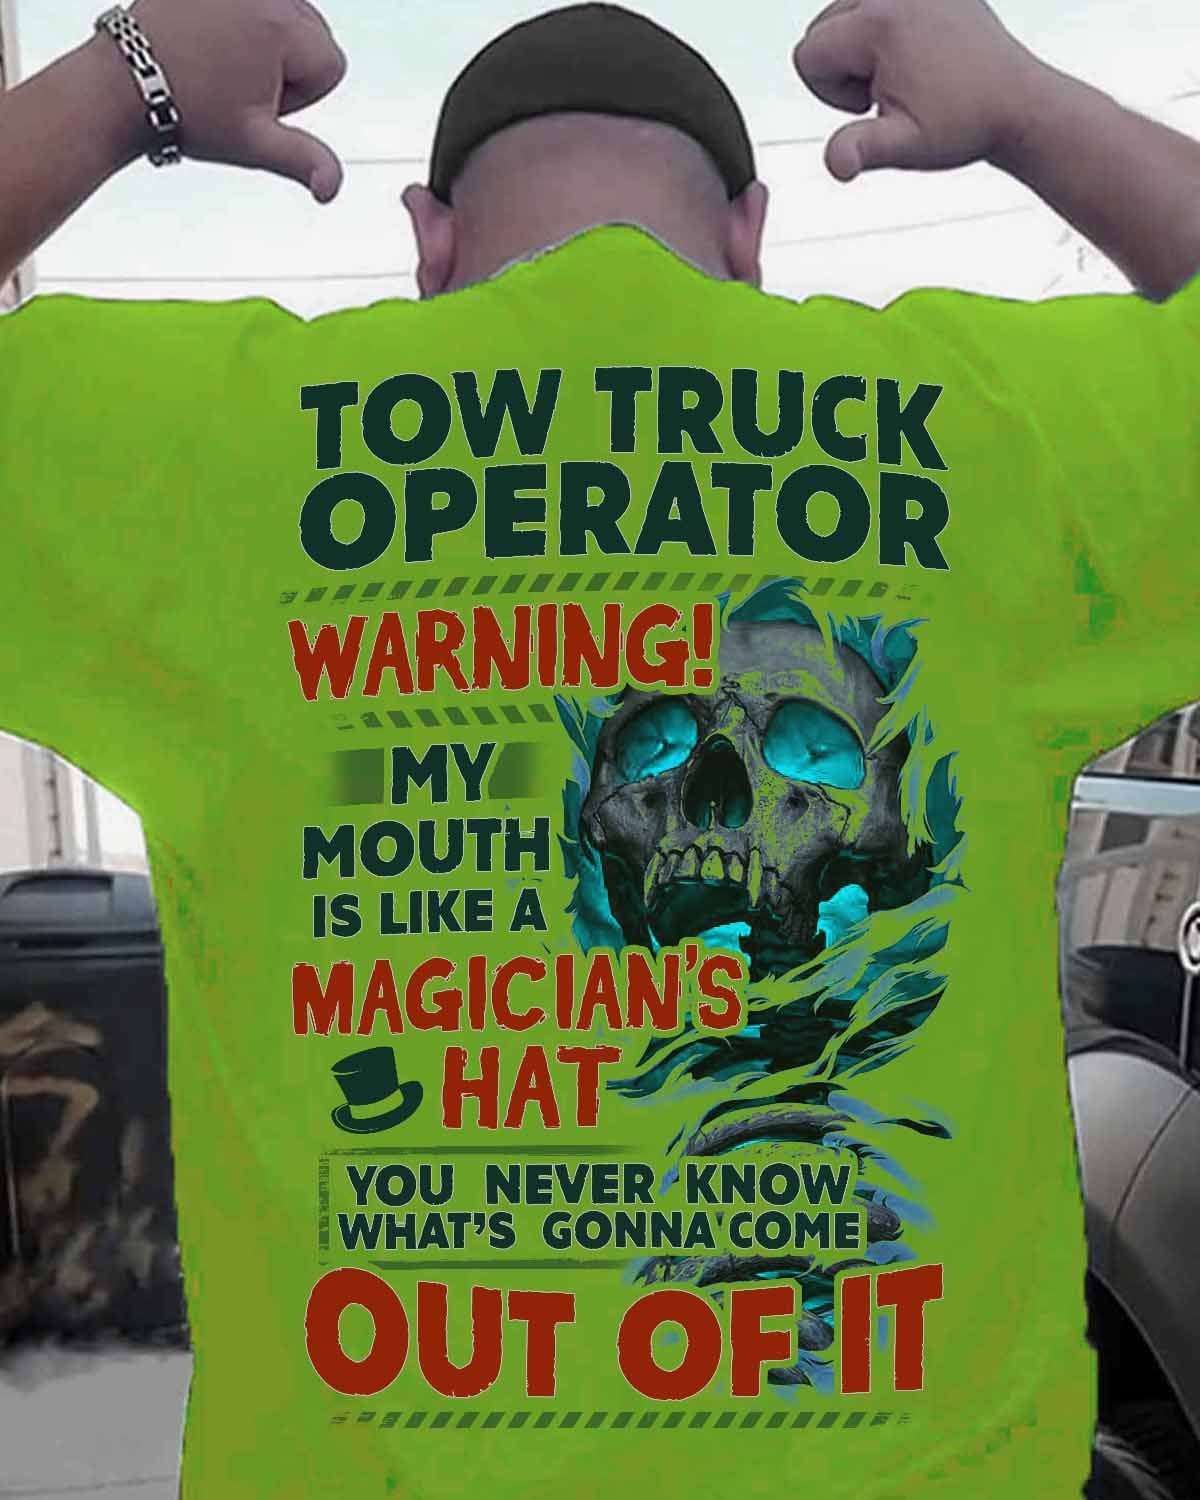 Skull Tow truck operator - Tow truck operator warning my mouth is like a magician's hat you never know